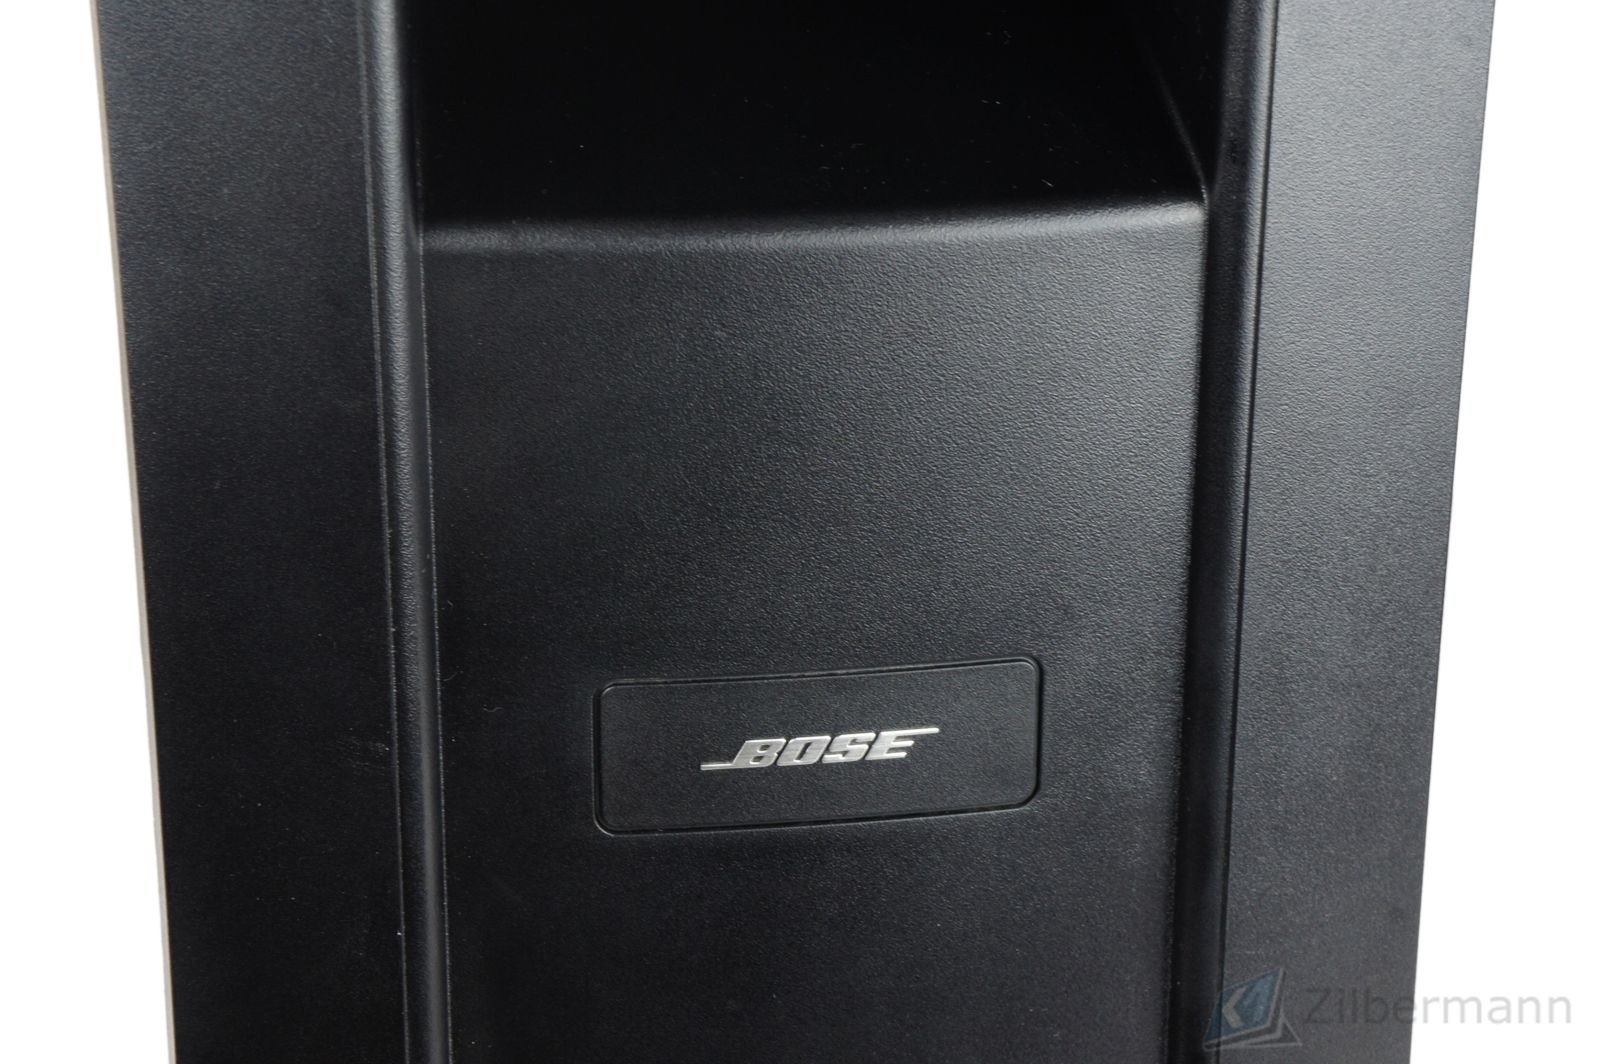 Bose_Lifestyle_18_Series_III_5.1_Subwoofer_02